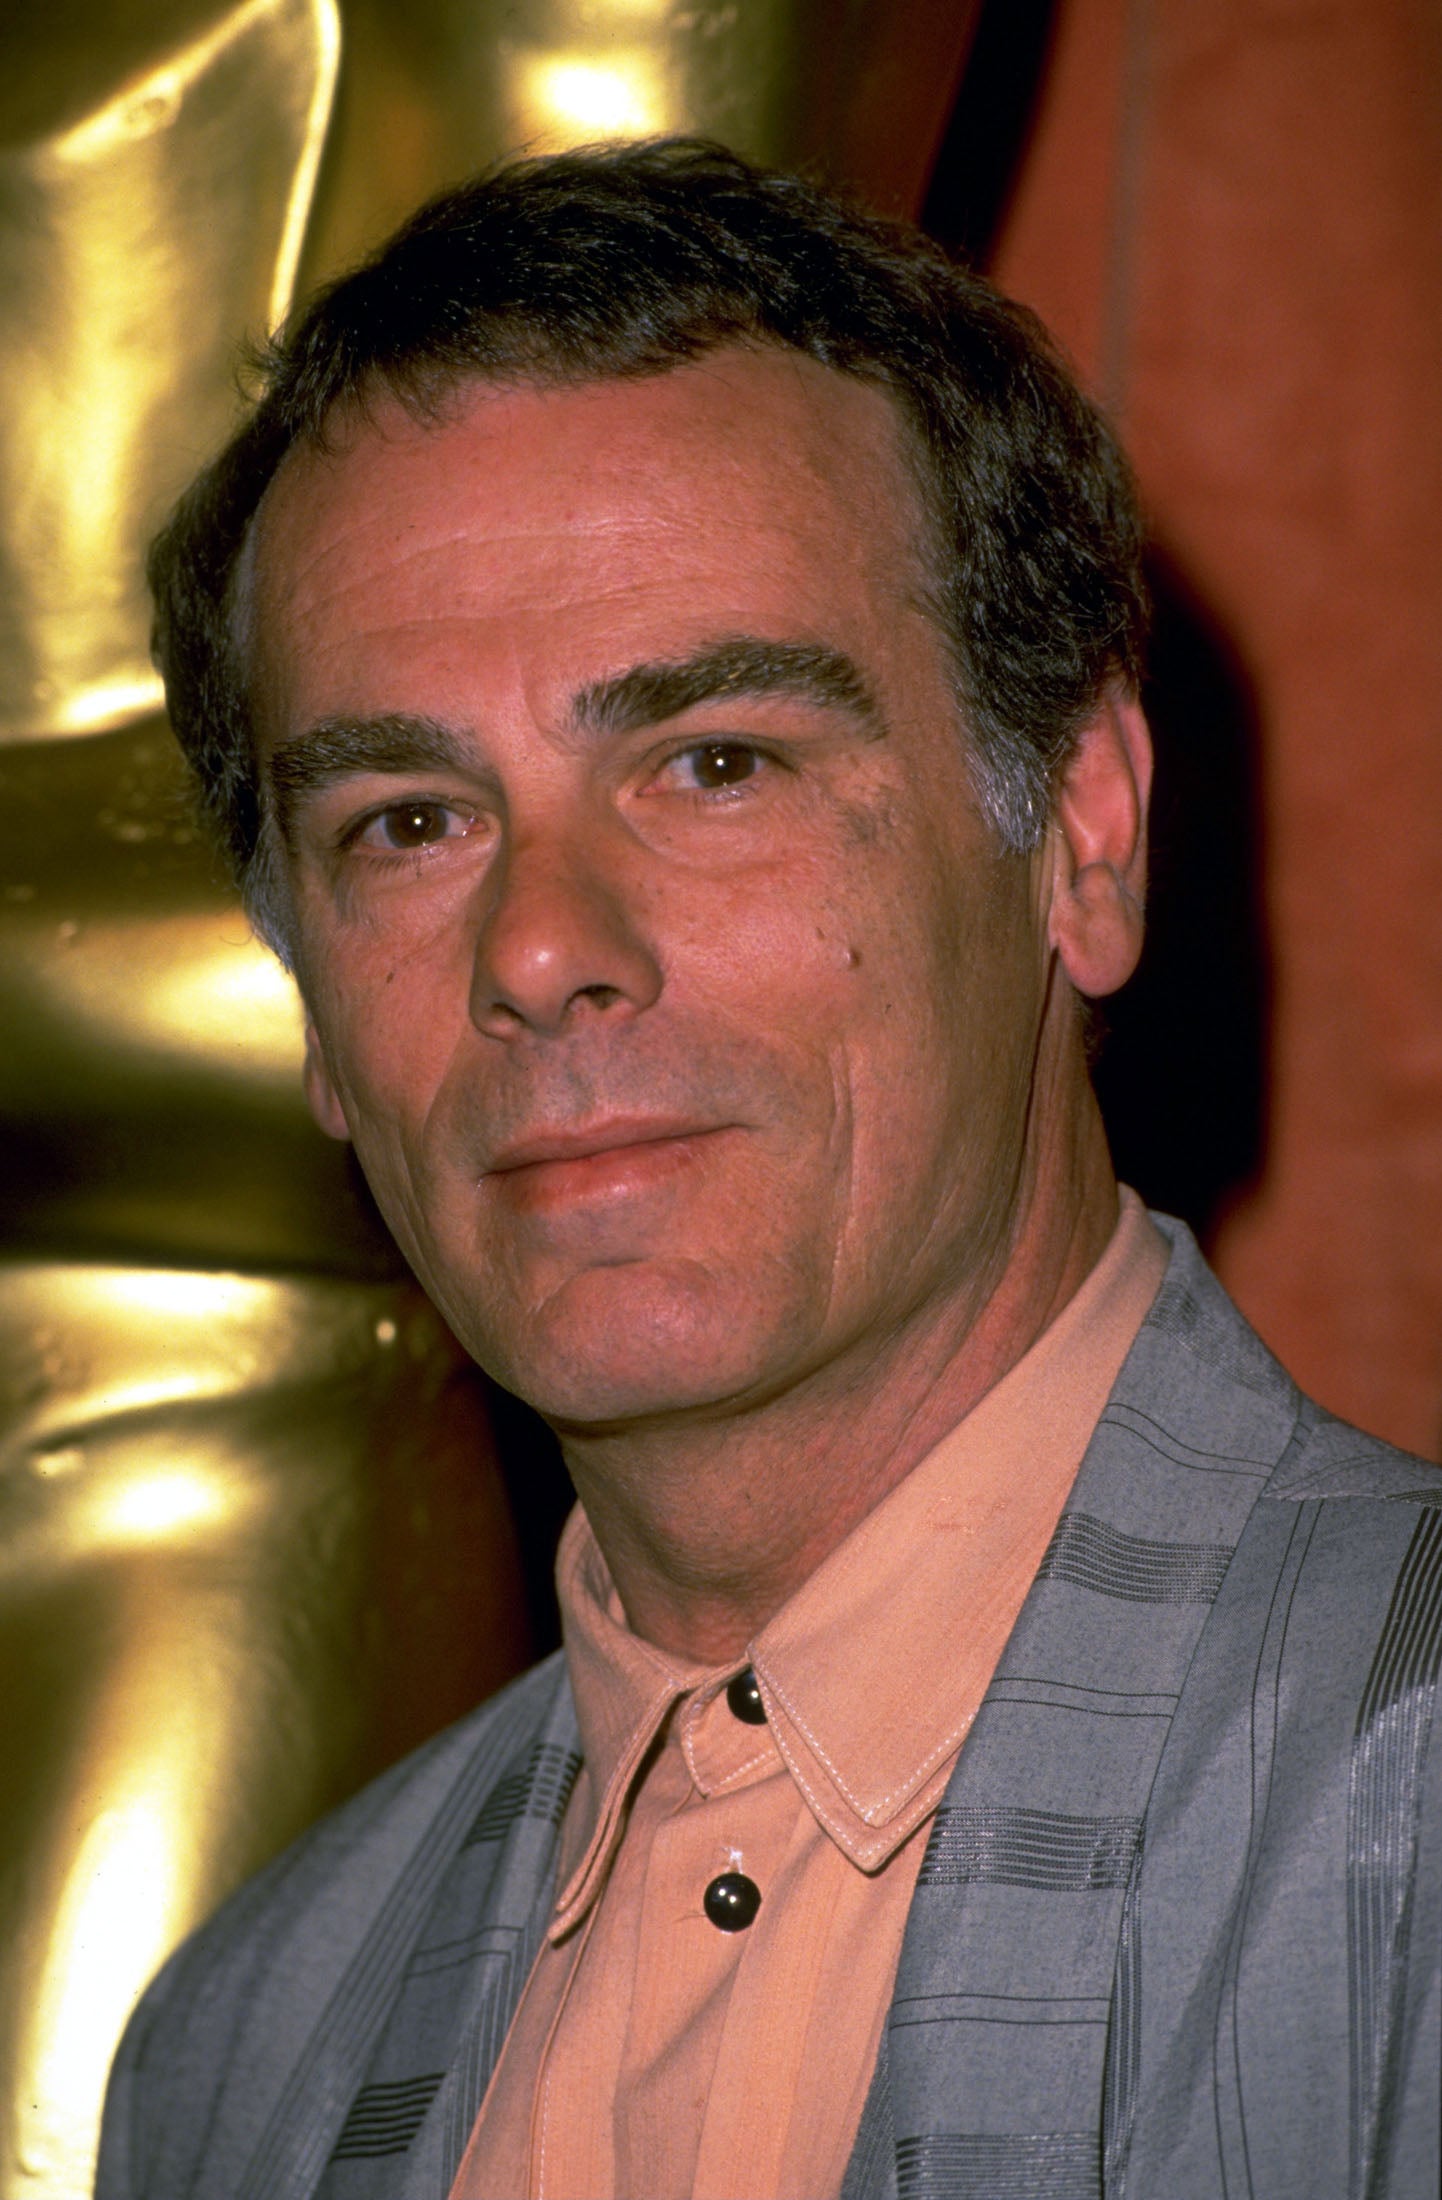 Dean Stockwell was renowned for his seven-decade career across film and TV